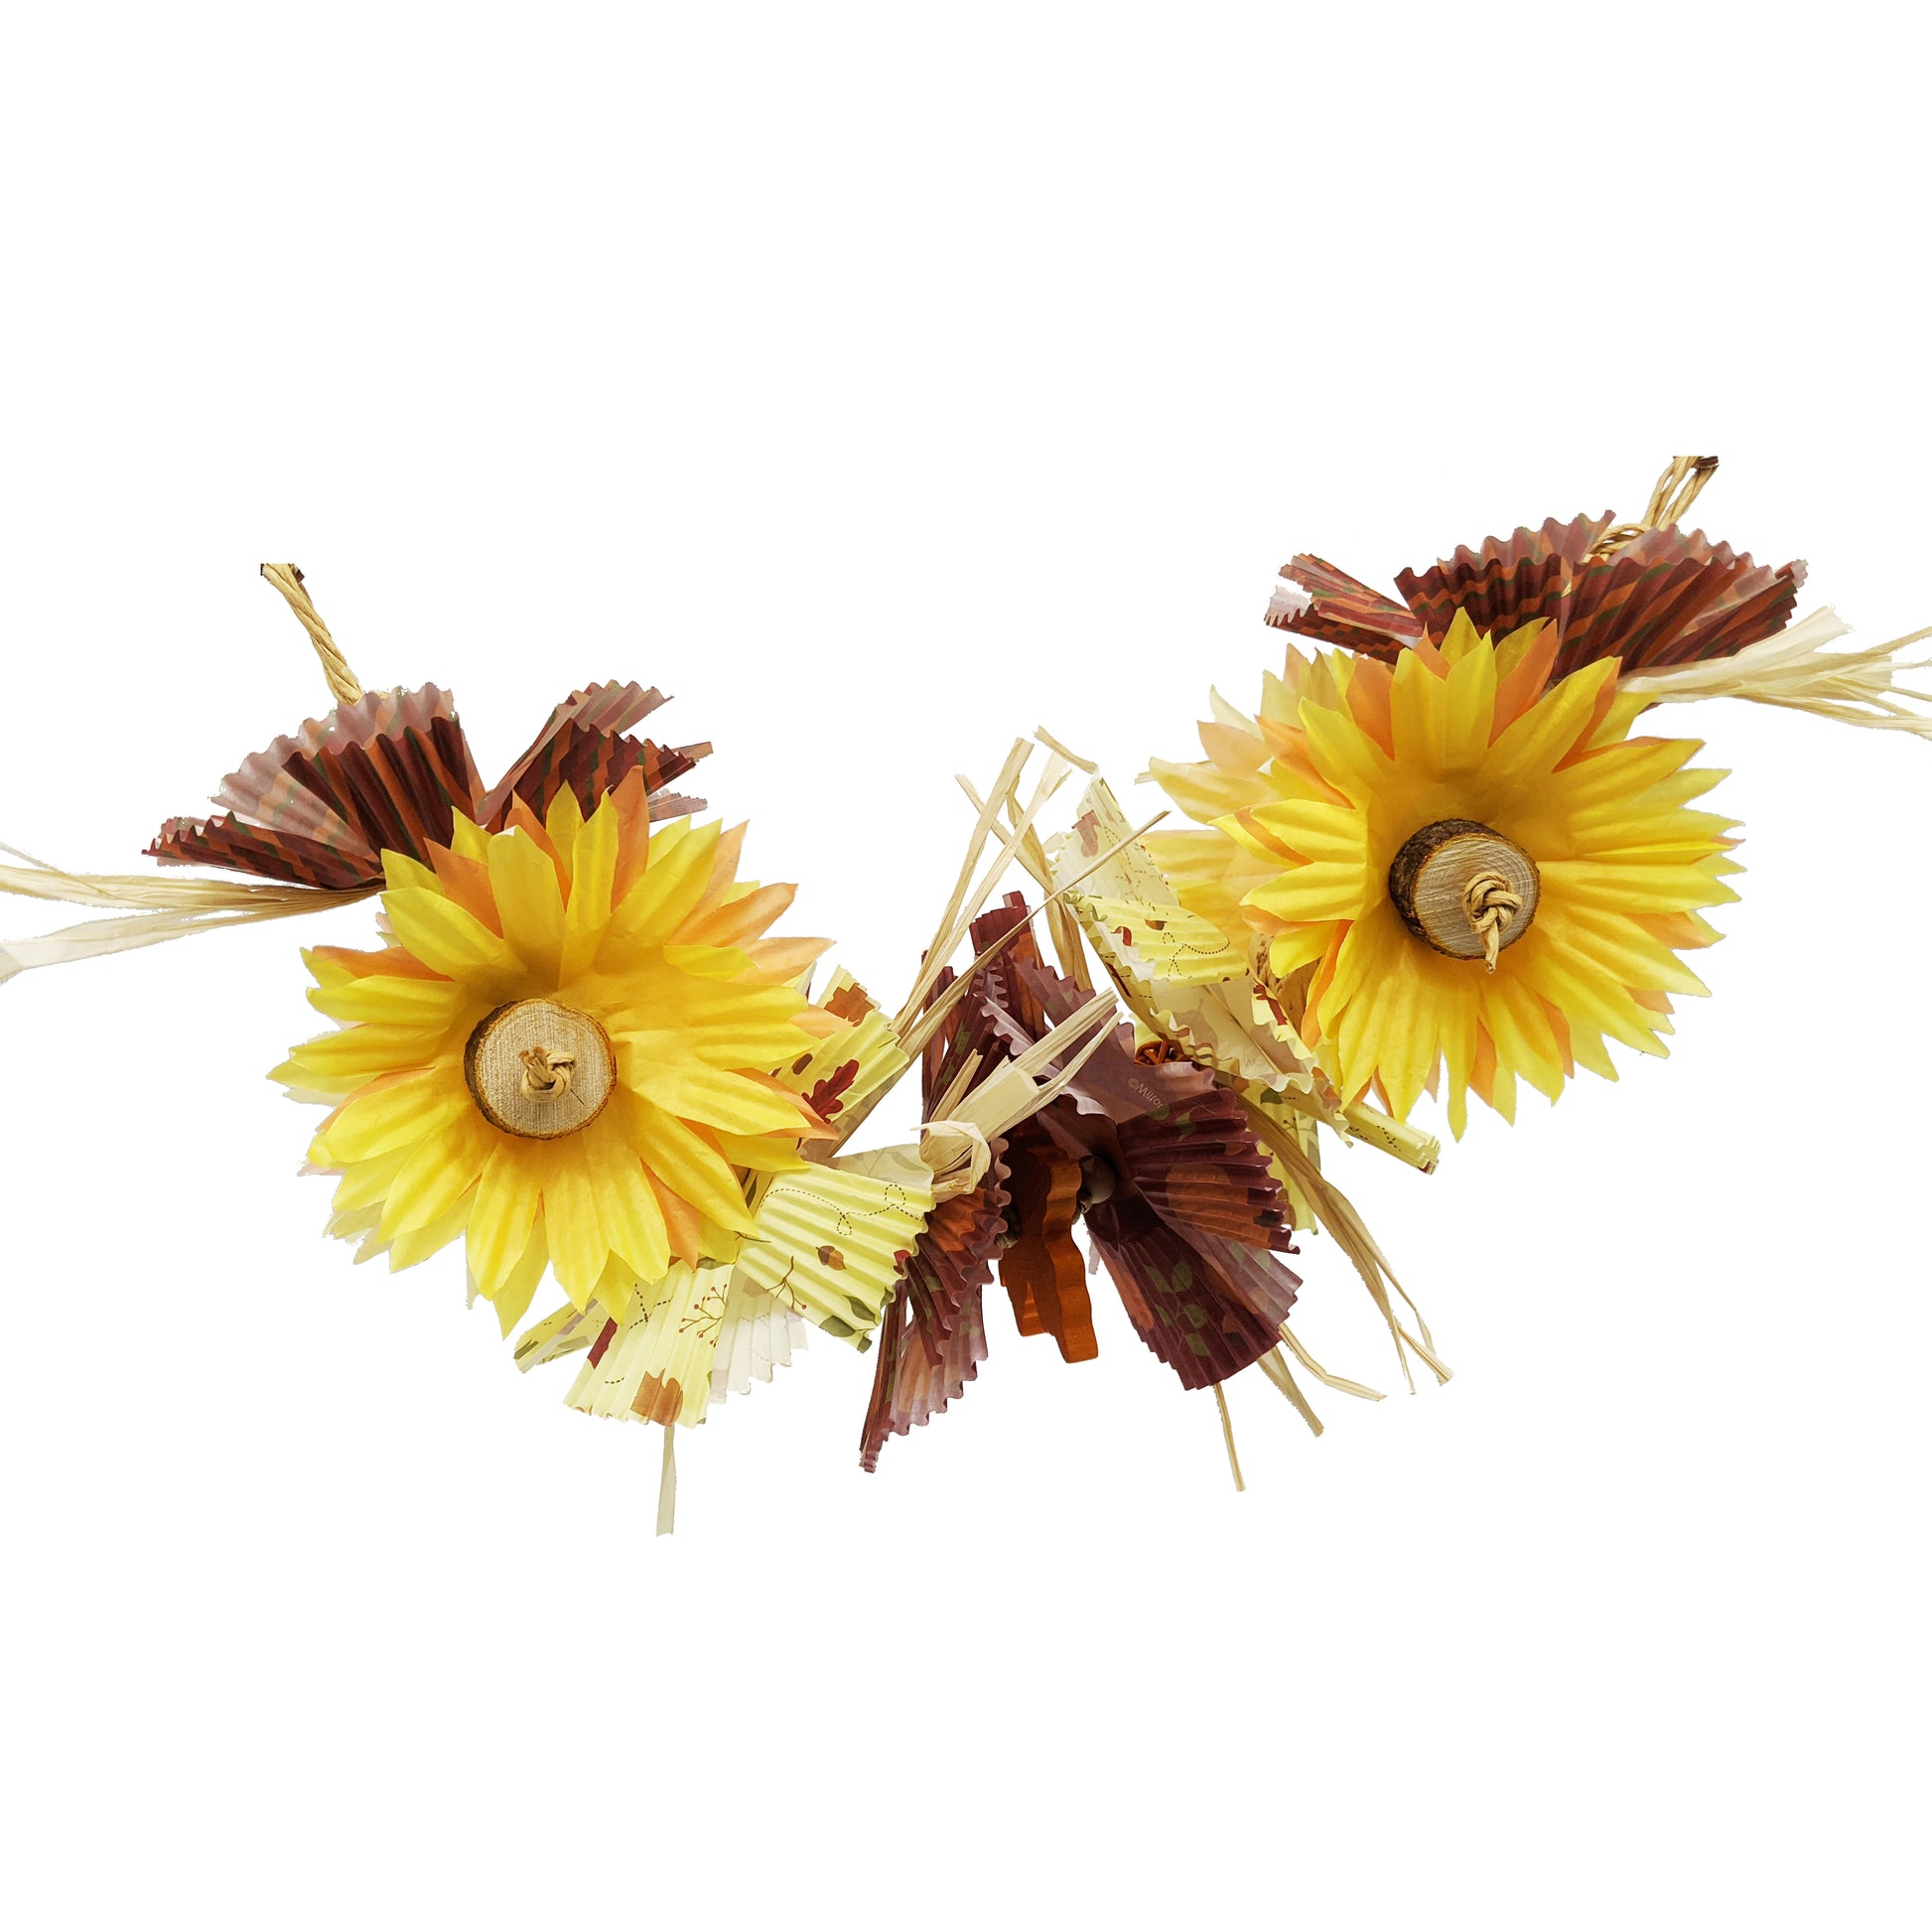 A fall themed bird toy that hangs from both ends like a garland. Has raffia, balsa blocks, and cupcake liners cut and layered to resemble sunflowers.